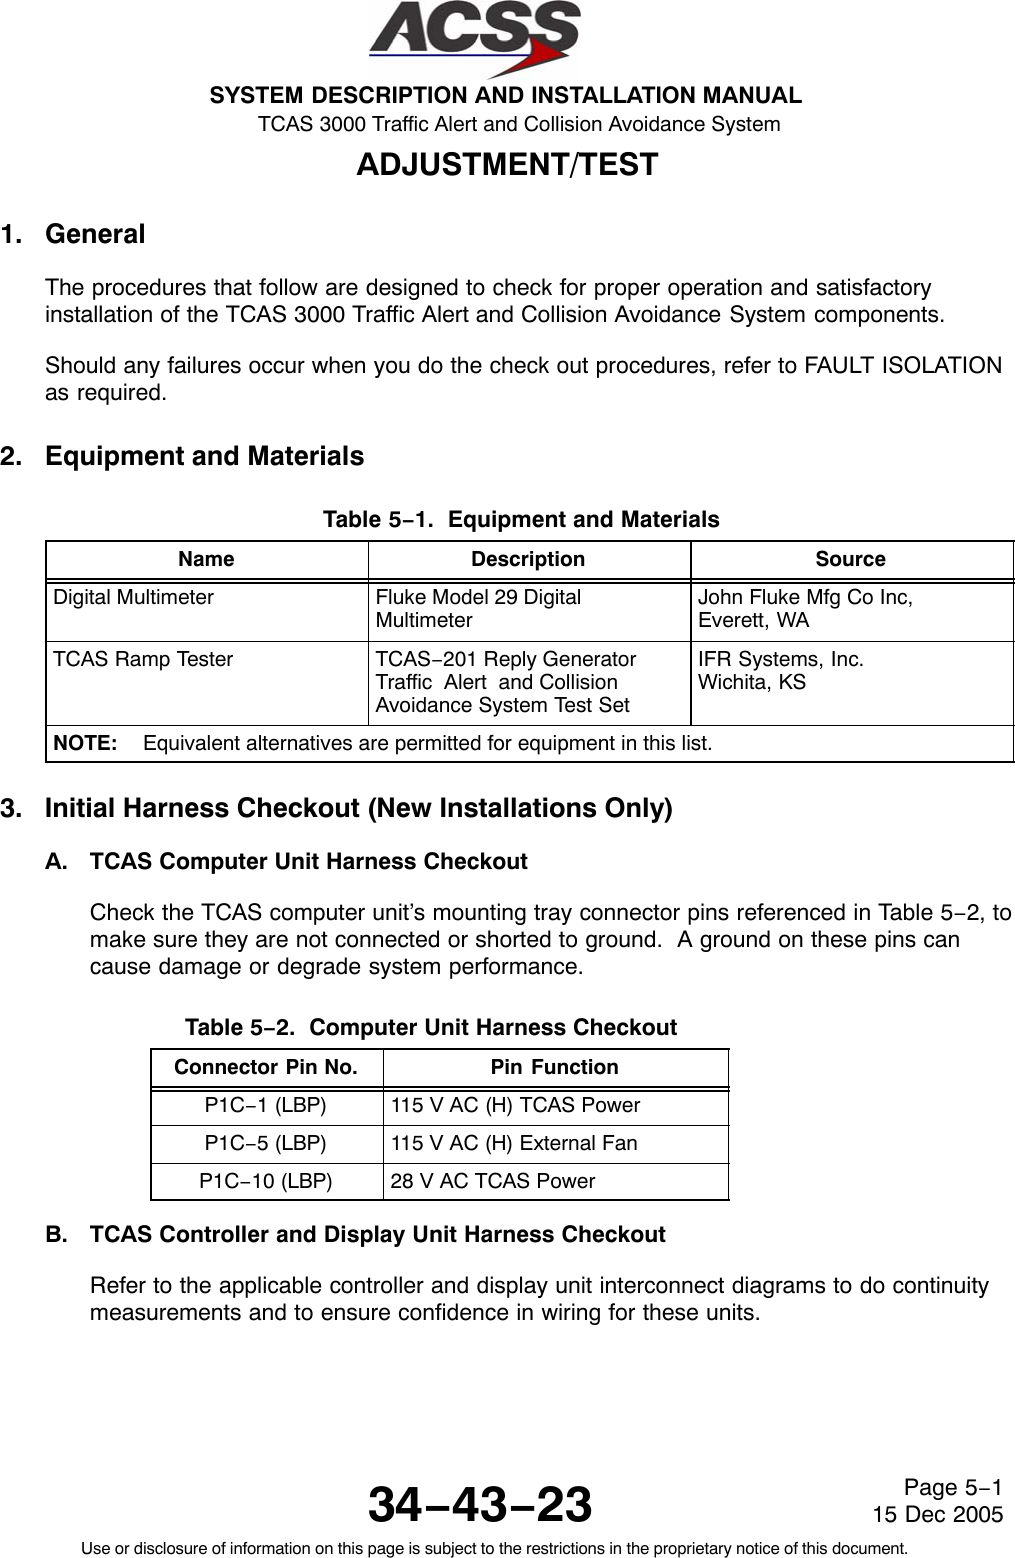 SYSTEM DESCRIPTION AND INSTALLATION MANUAL TCAS 3000 Traffic Alert and Collision Avoidance System34−43−23Use or disclosure of information on this page is subject to the restrictions in the proprietary notice of this document.Page 5−115 Dec 2005ADJUSTMENT/TEST1. GeneralThe procedures that follow are designed to check for proper operation and satisfactoryinstallation of the TCAS 3000 Traffic Alert and Collision Avoidance System components.Should any failures occur when you do the check out procedures, refer to FAULT ISOLATIONas required.2. Equipment and MaterialsTable 5−1.  Equipment and Materials  Name Description SourceDigital Multimeter Fluke Model 29 DigitalMultimeterJohn Fluke Mfg Co Inc, Everett, WATCAS Ramp Tester TCAS−201 Reply GeneratorTraffic  Alert  and CollisionAvoidance System Test SetIFR Systems, Inc.Wichita, KSNOTE: Equivalent alternatives are permitted for equipment in this list.3. Initial Harness Checkout (New Installations Only)A. TCAS Computer Unit Harness CheckoutCheck the TCAS computer unit’s mounting tray connector pins referenced in Table 5−2, tomake sure they are not connected or shorted to ground.  A ground on these pins cancause damage or degrade system performance.Table 5−2.  Computer Unit Harness Checkout  Connector Pin No. Pin FunctionP1C−1 (LBP) 115 V AC (H) TCAS PowerP1C−5 (LBP) 115 V AC (H) External FanP1C−10 (LBP) 28 V AC TCAS PowerB. TCAS Controller and Display Unit Harness CheckoutRefer to the applicable controller and display unit interconnect diagrams to do continuitymeasurements and to ensure confidence in wiring for these units.